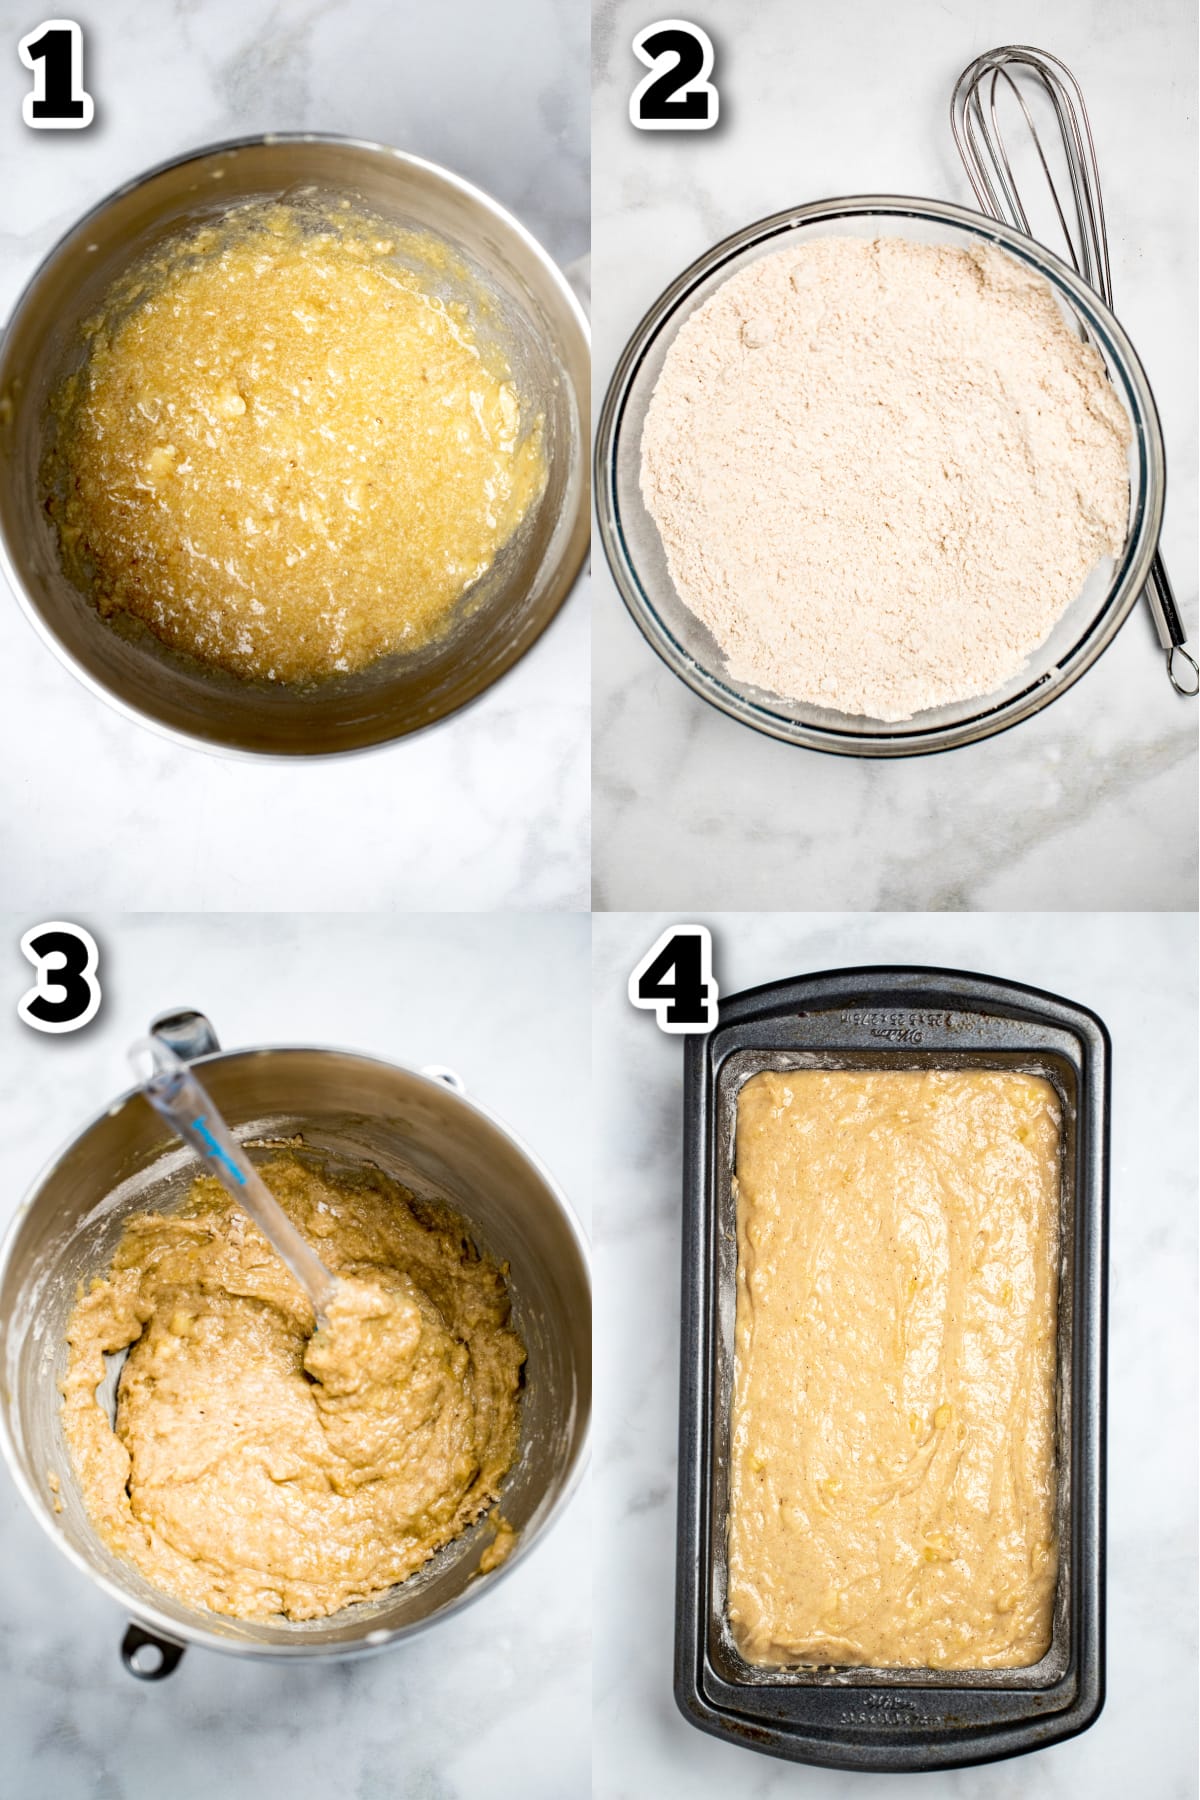 Step by step instructions for how to make gluten free banana bread.